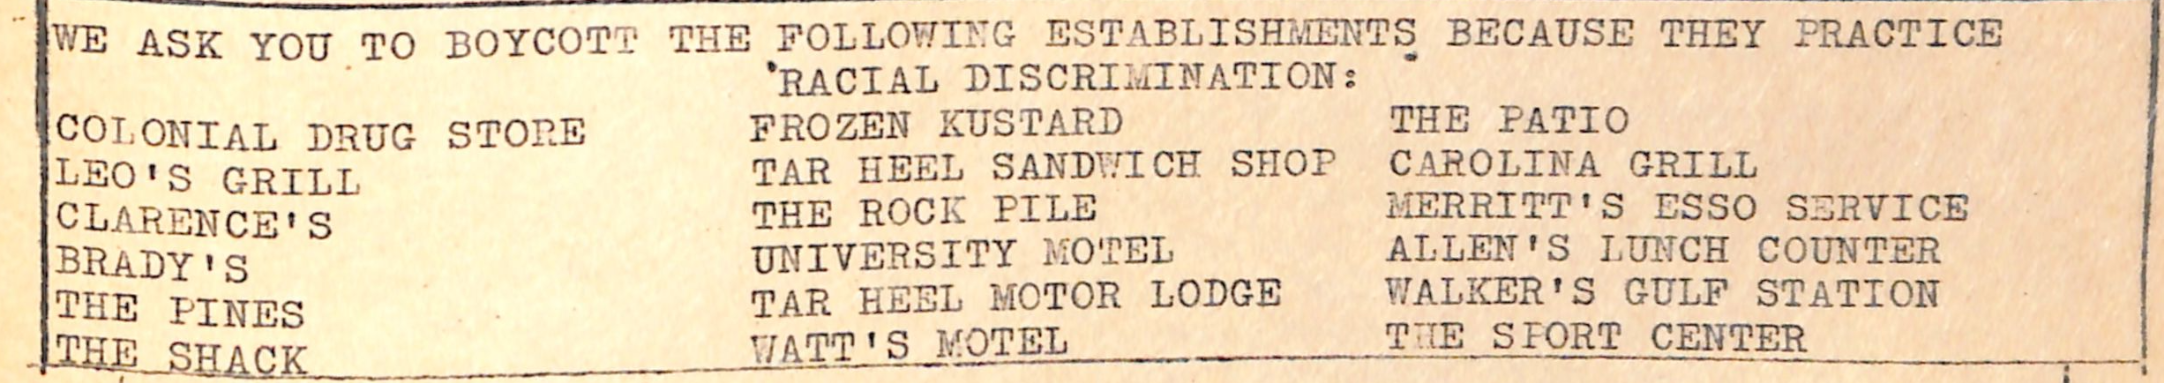 This newspaper clipping from The Chapel Hill Conscience provides a list of establishments to boycott due to their continued practice of racial discrimination.